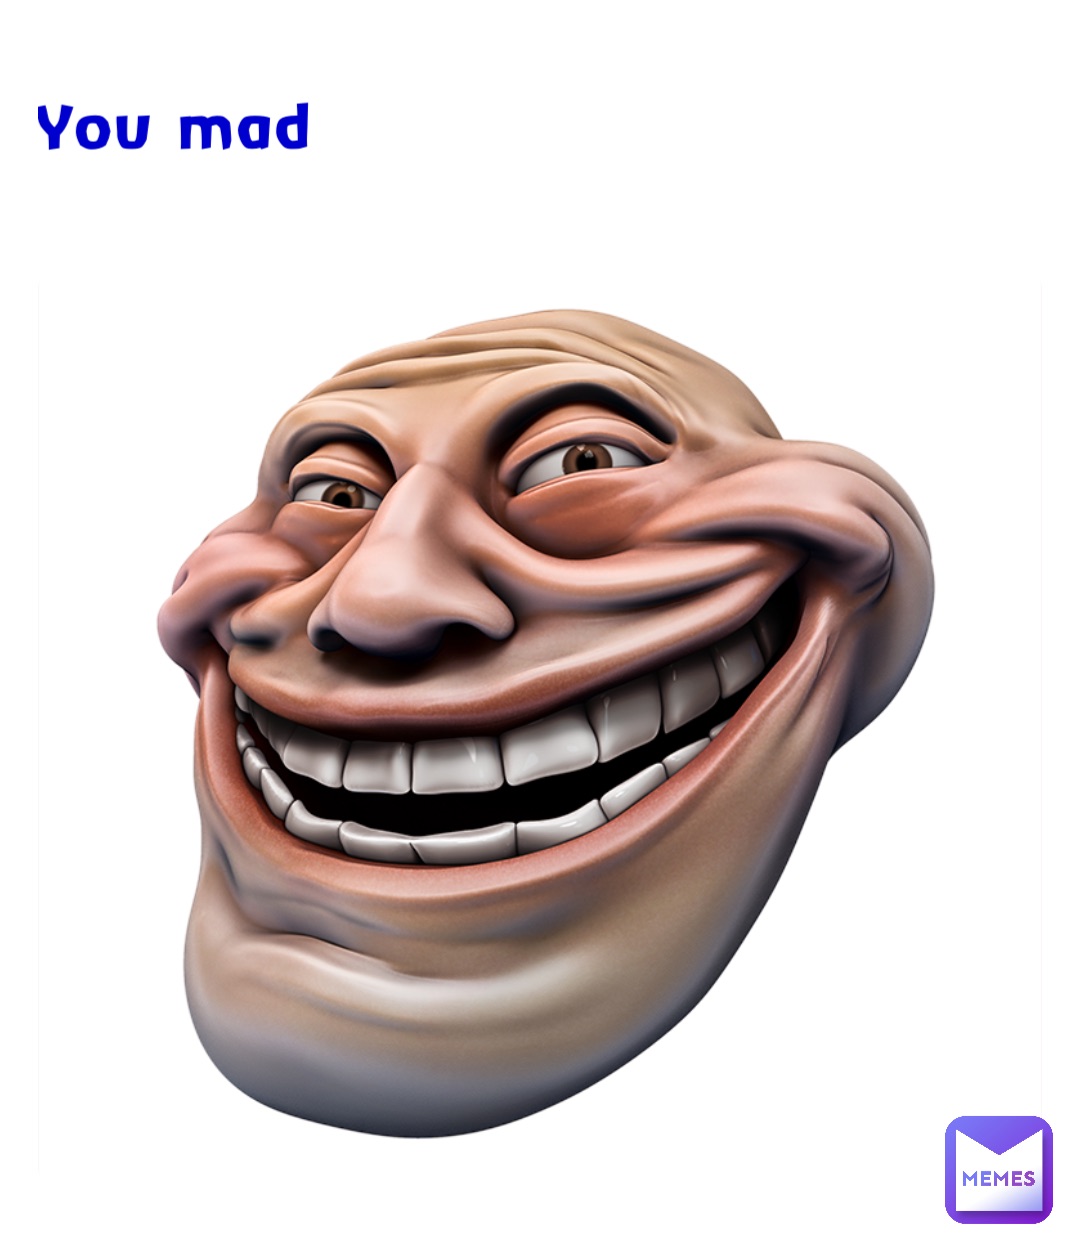 You mad